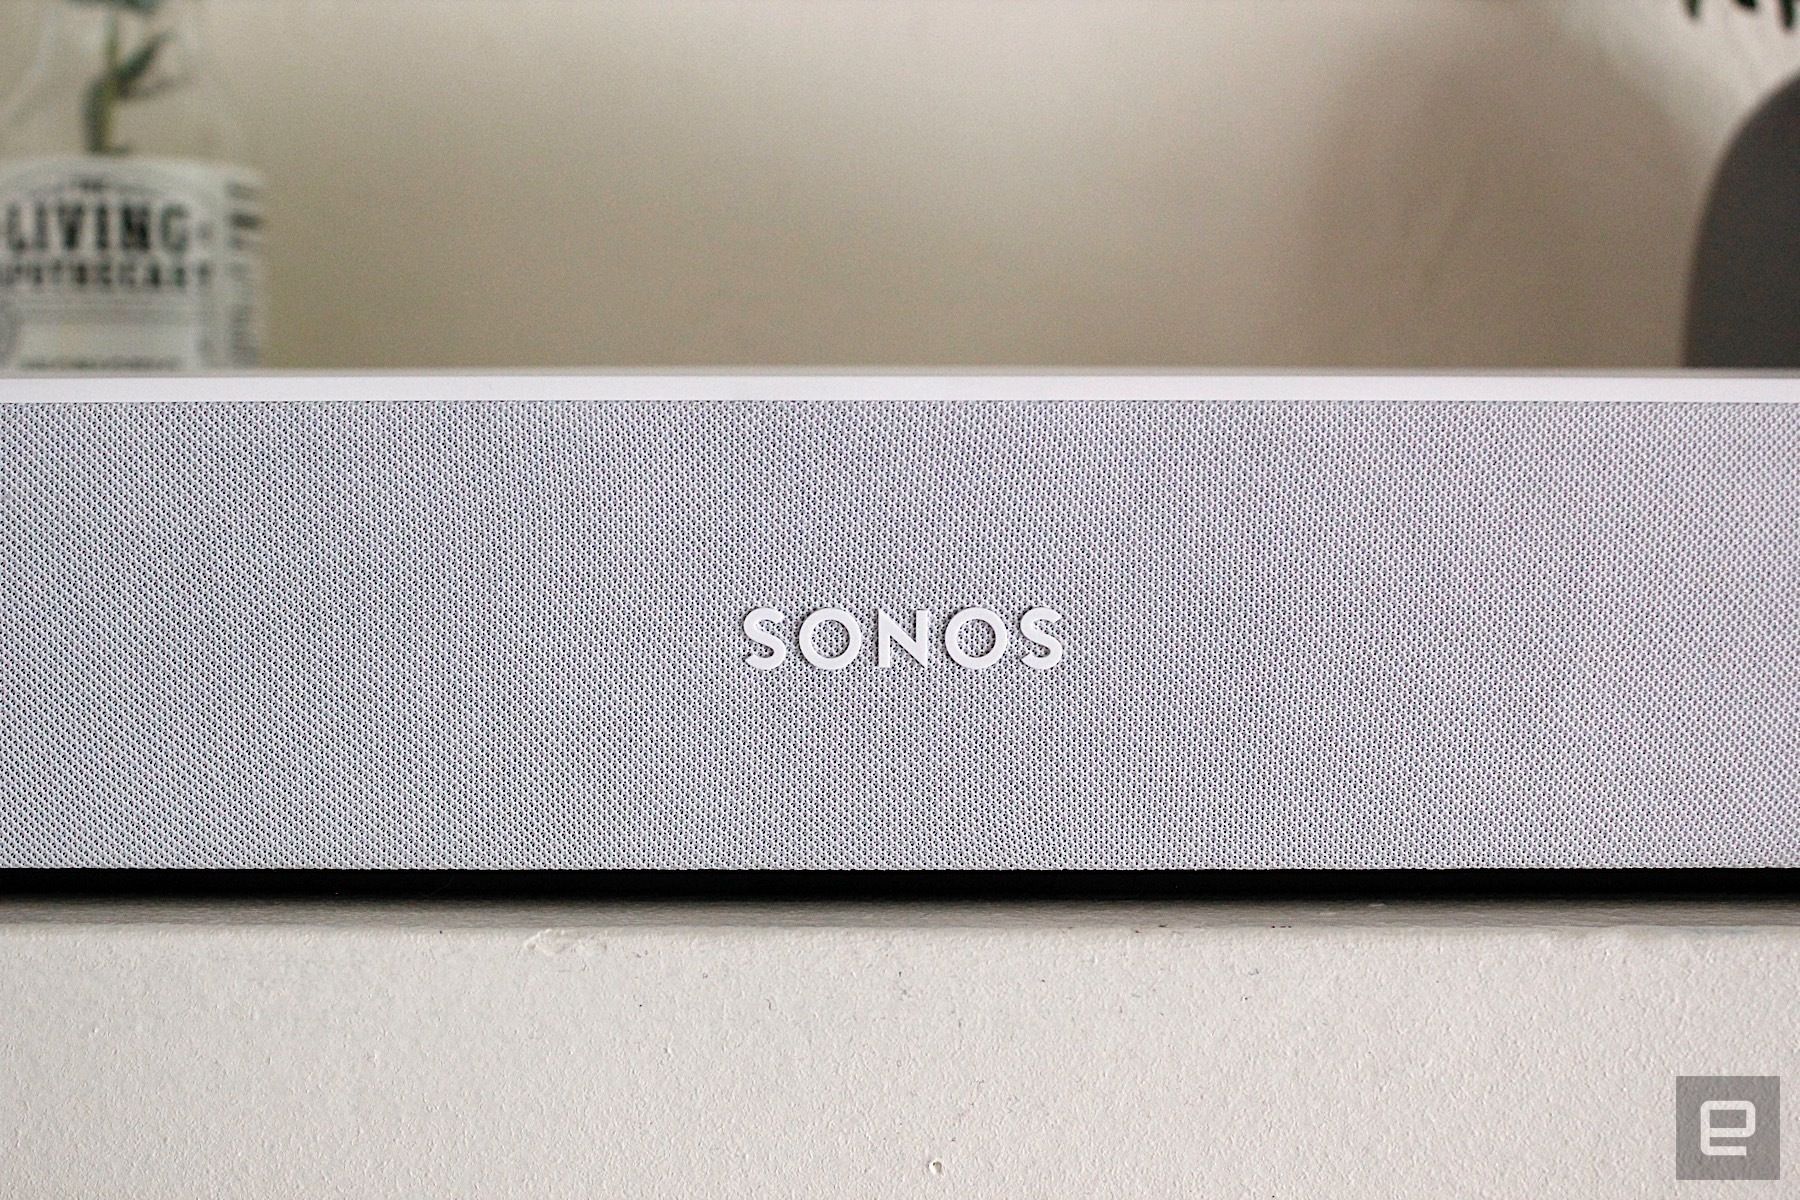 Sonos’ Bound can reportedly pass tune to other audio system